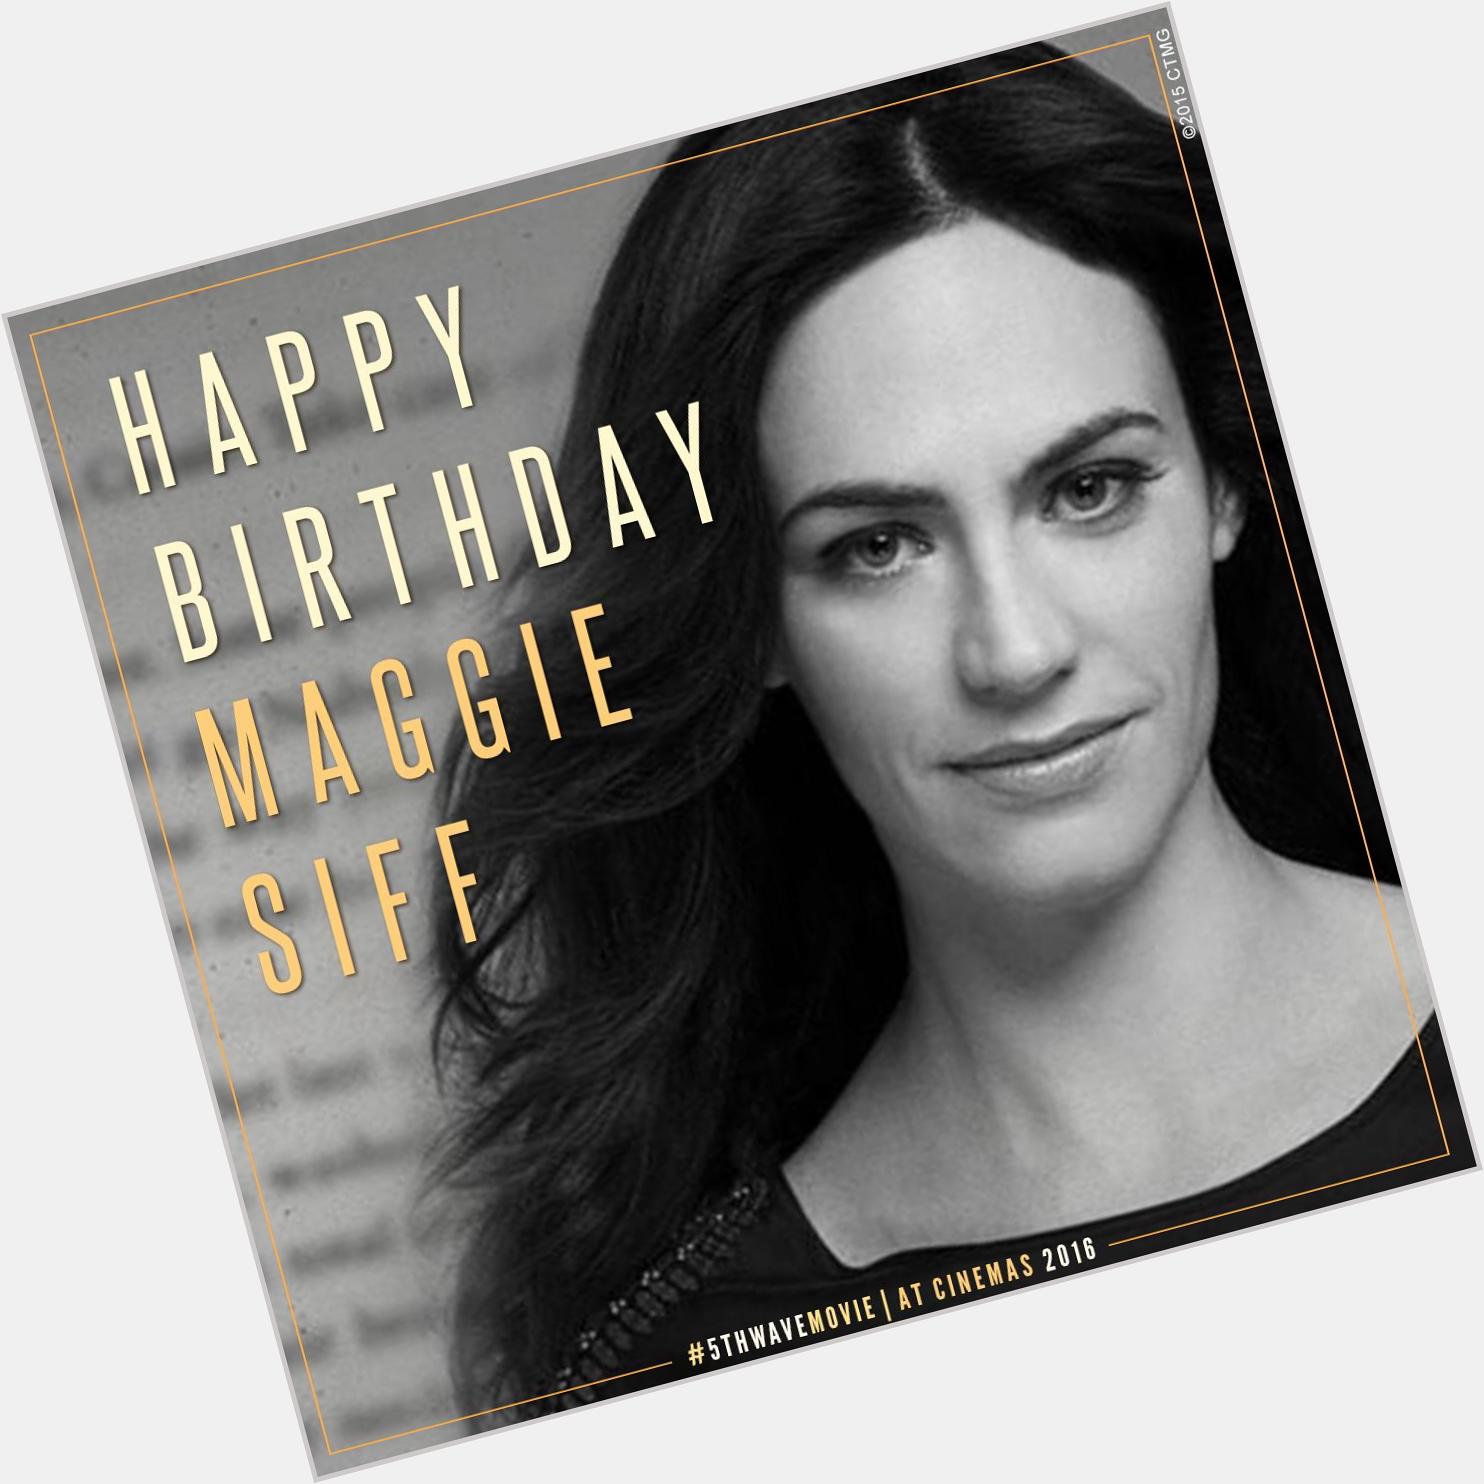 To wish the amazing Maggie Siff a very Happy Birthday! The is coming to cinemas 2016. 